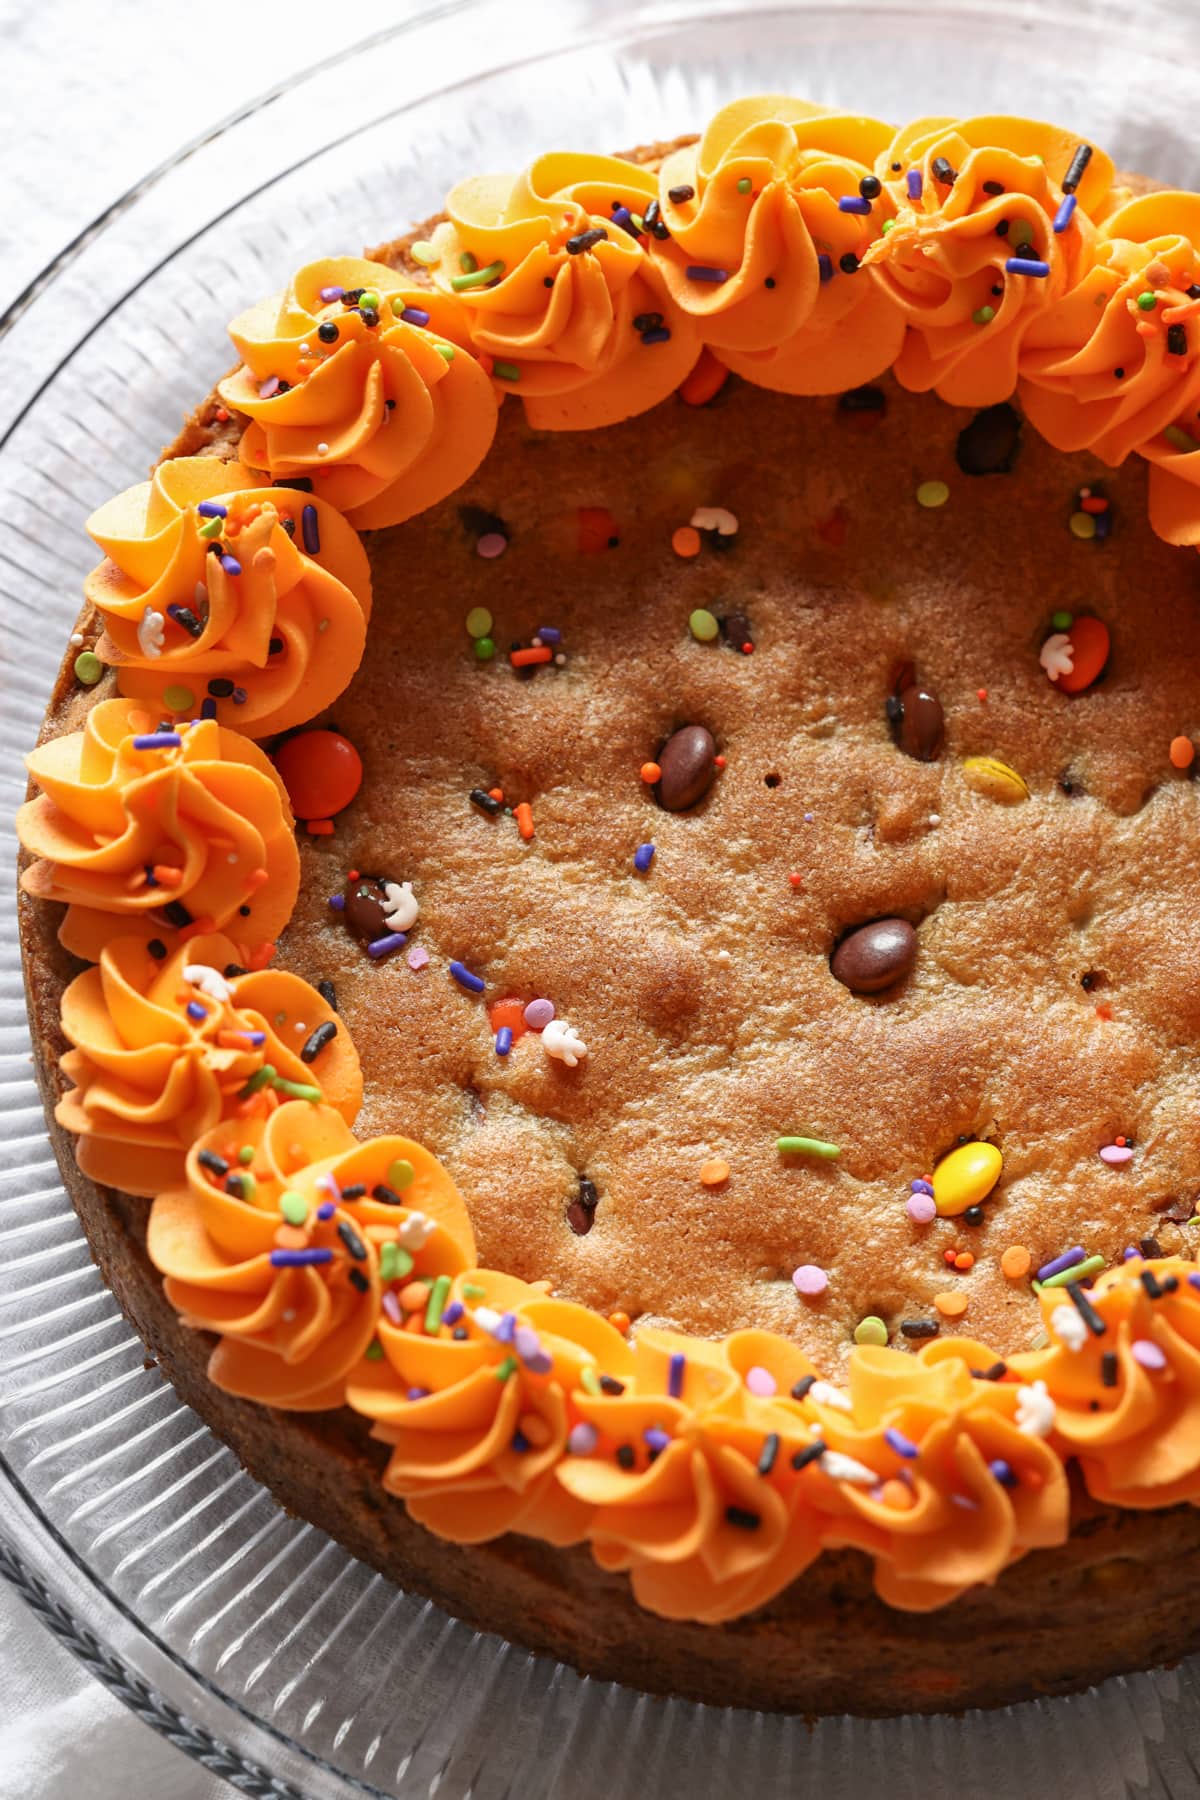 Fluffy orange buttercream frosting swirled around the edge of a biscuit cake